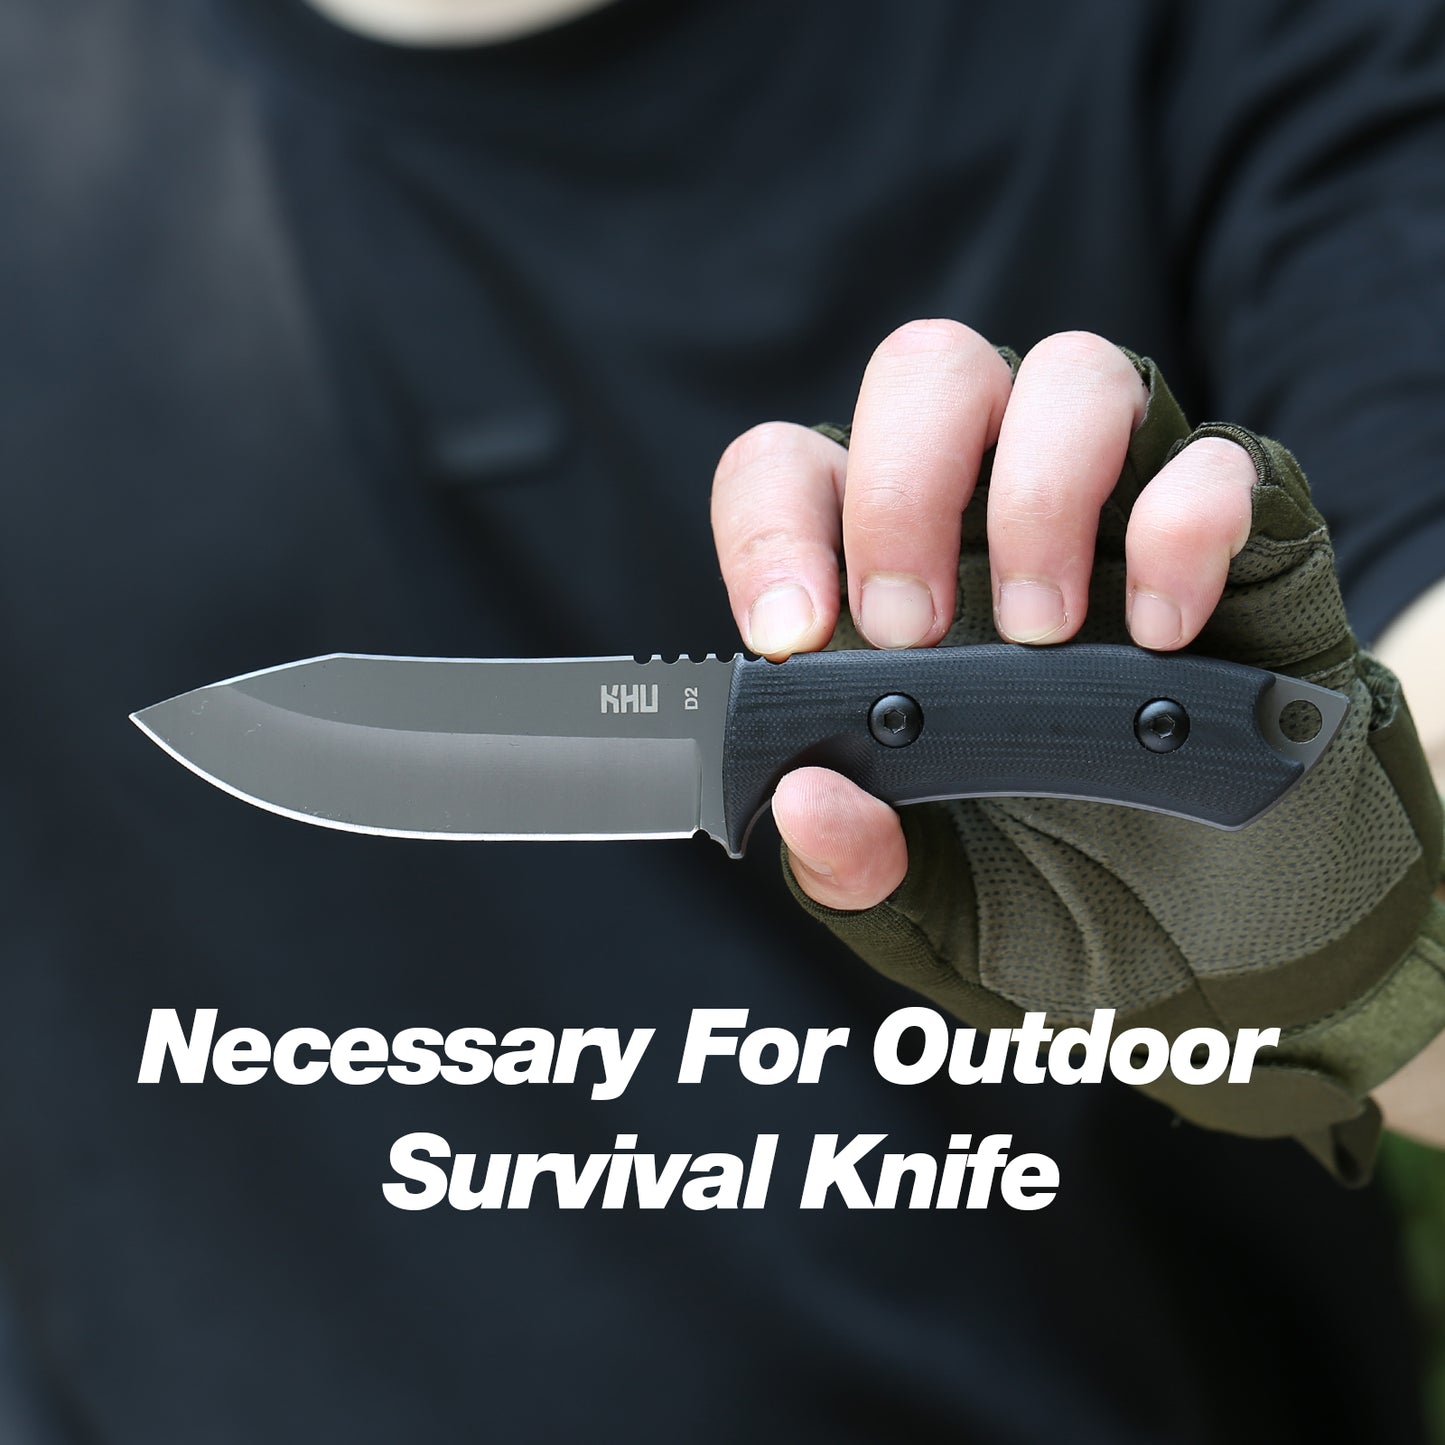 KHU Fixed Blade Knife Tactical, Hunting Knife Survival Knife D2 Steel G10 Handle, Outdoor Hunting Camping Accessories Camping Gear With Kydex Sheath